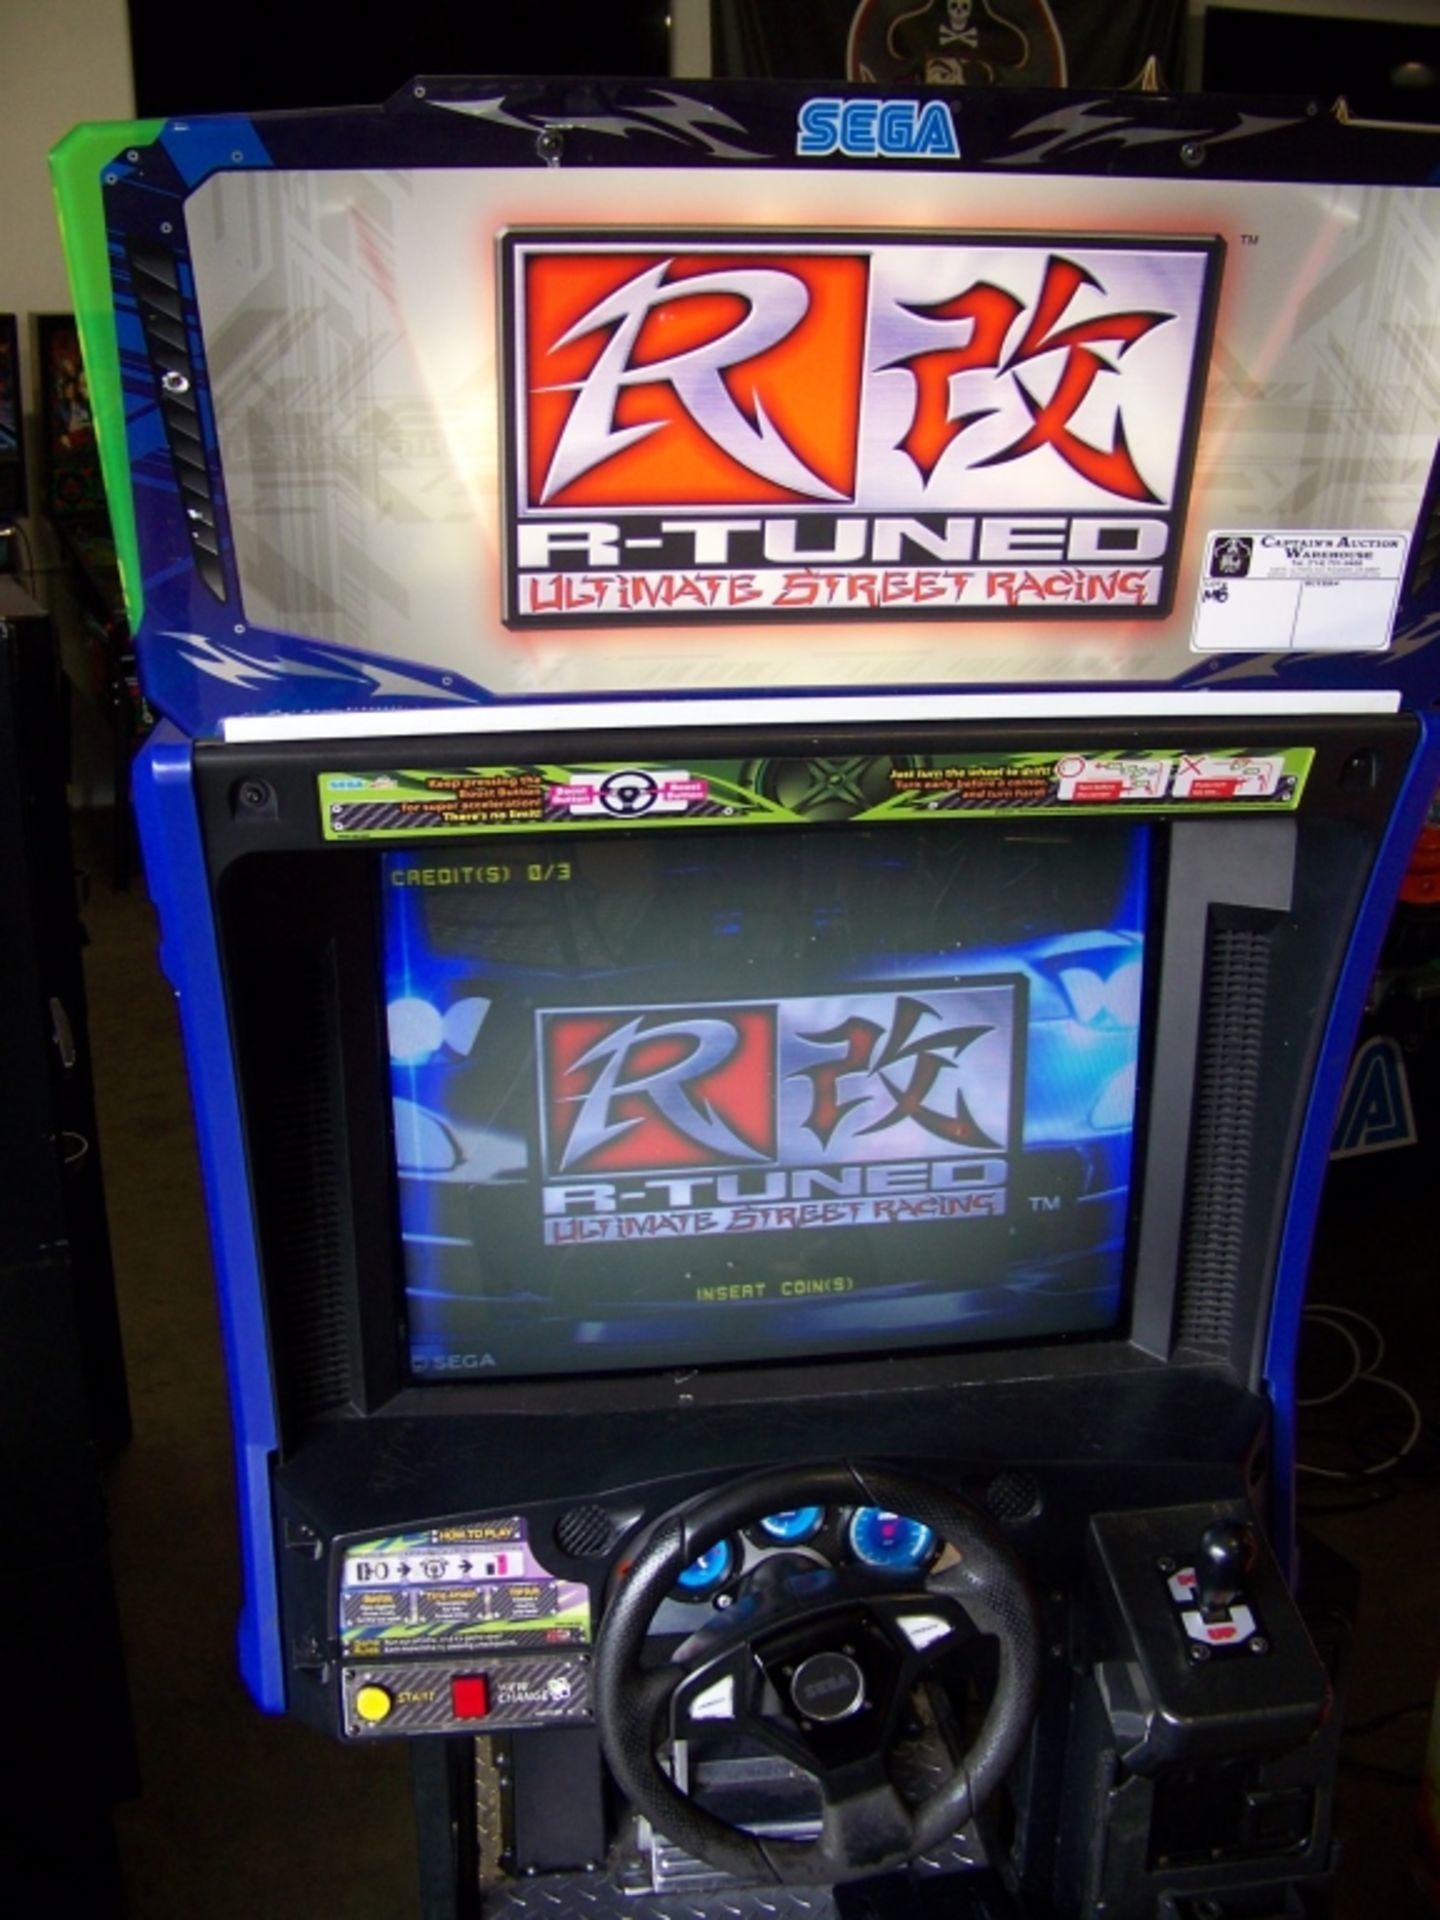 R-TUNED STREET RACING ARCADE GAME SEGA Item is in used condition. Evidence of wear and commercial - Image 5 of 5